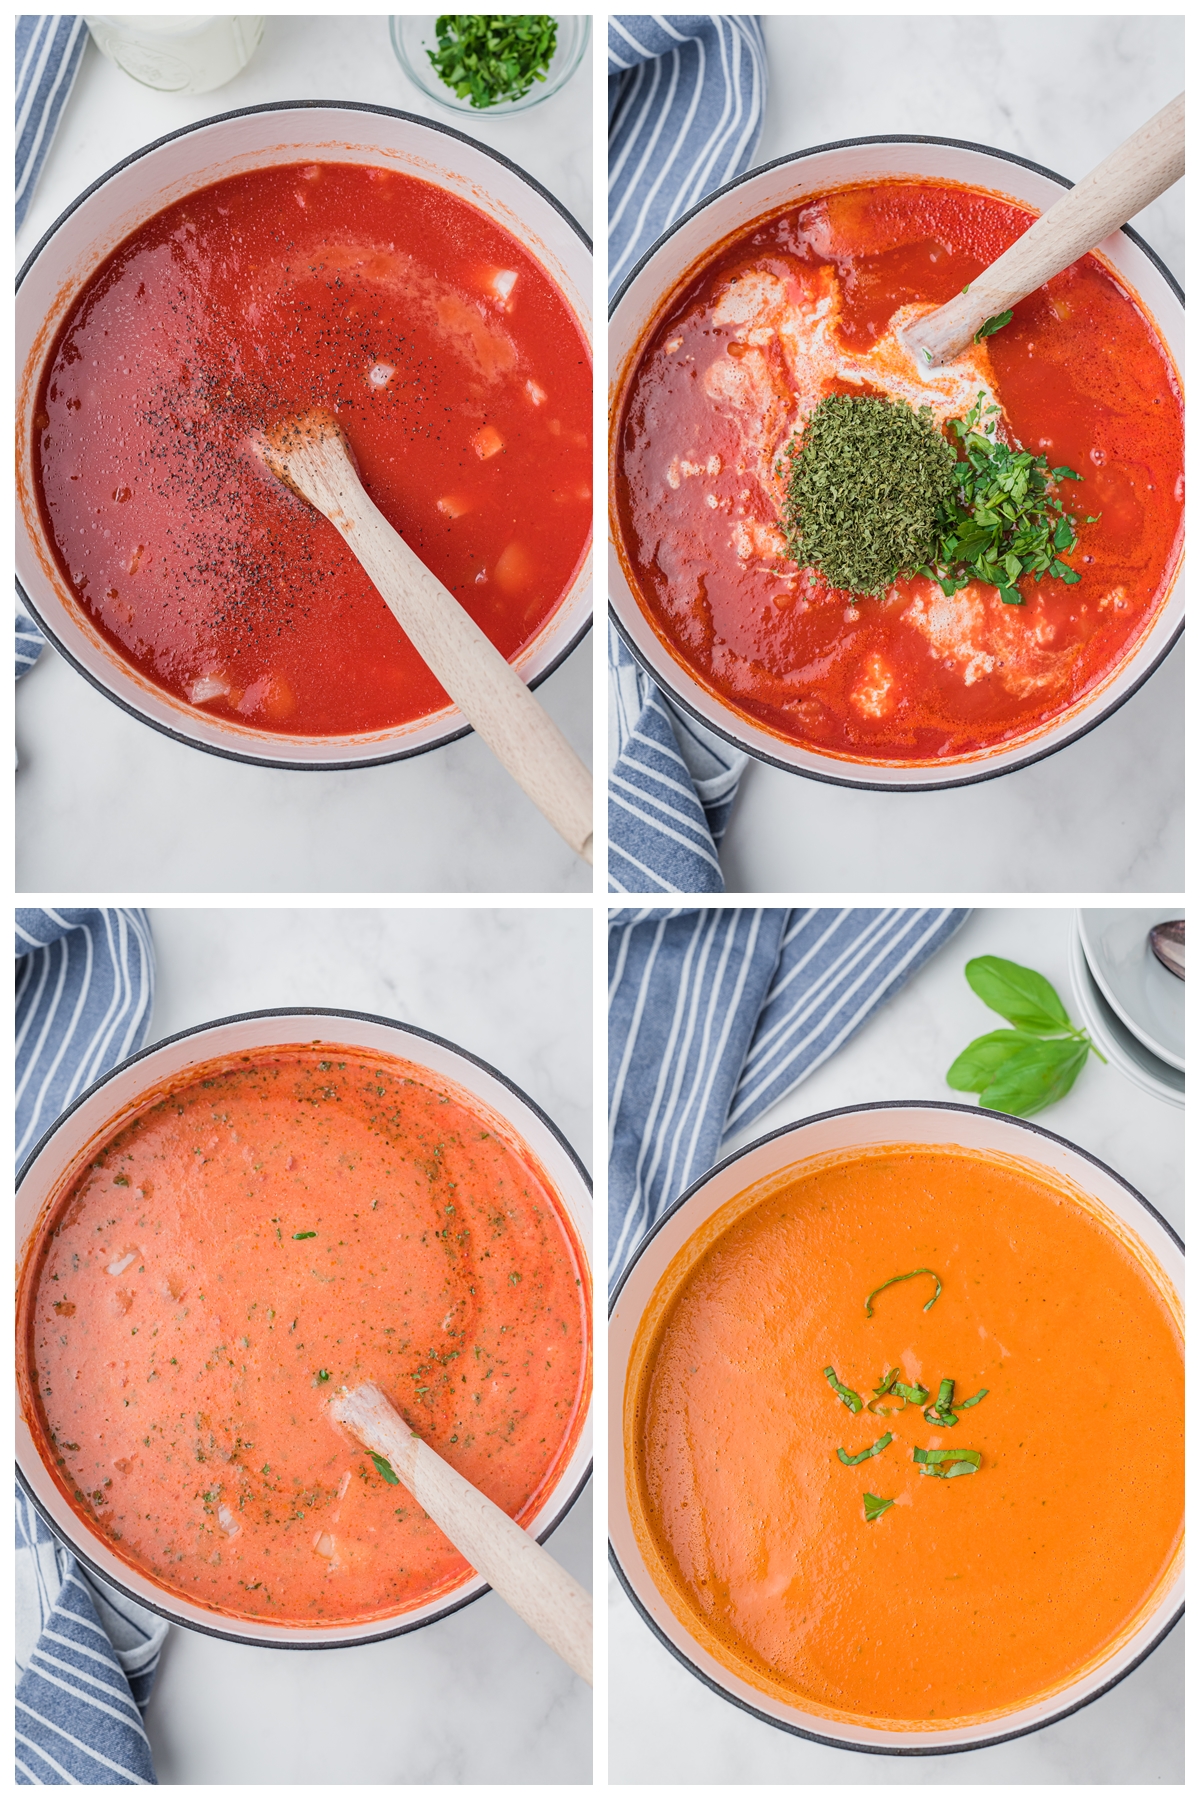 Procedure of cooking a tomato soup